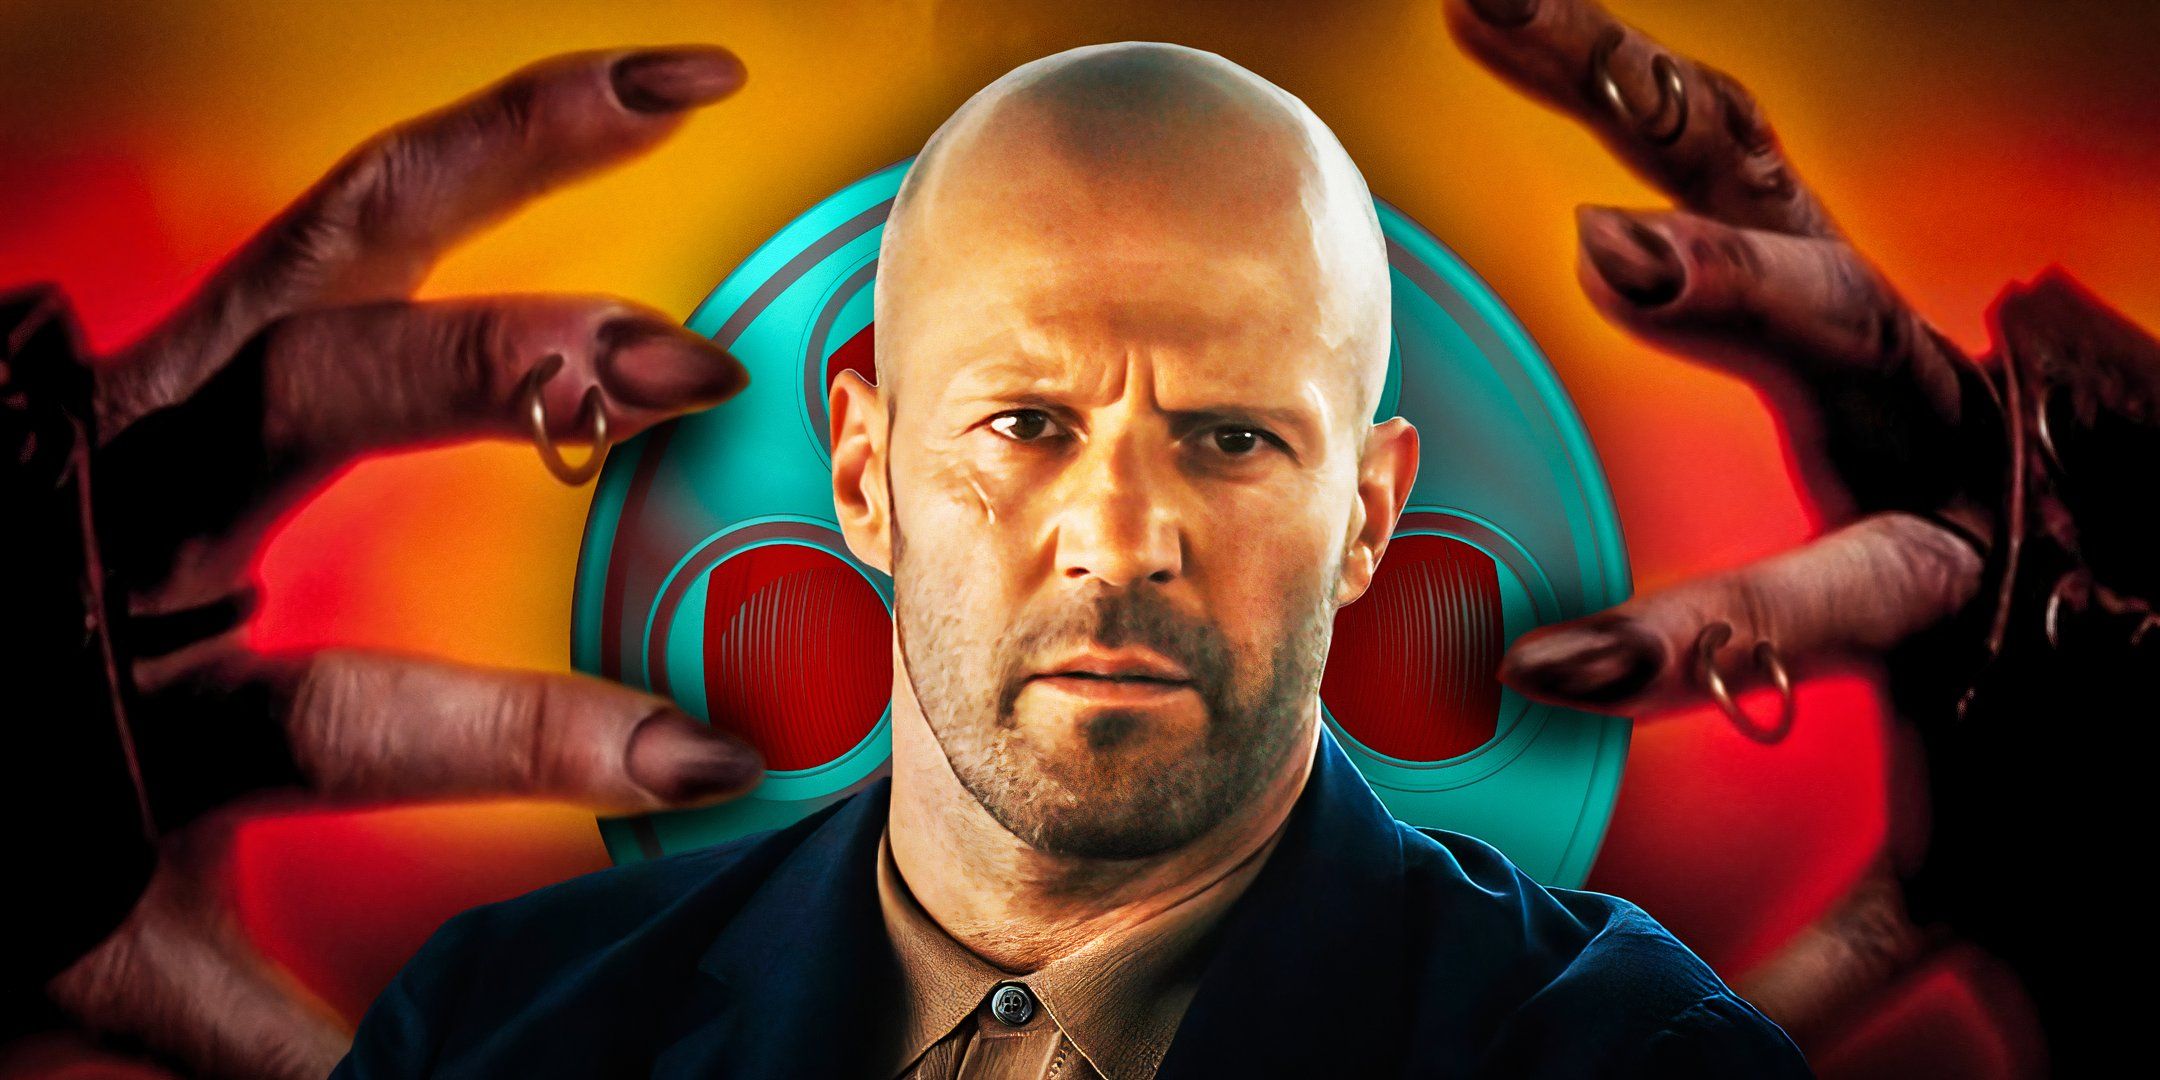 Jason Statham as H from Wrath of Man in front of Ghosts of Mars poster